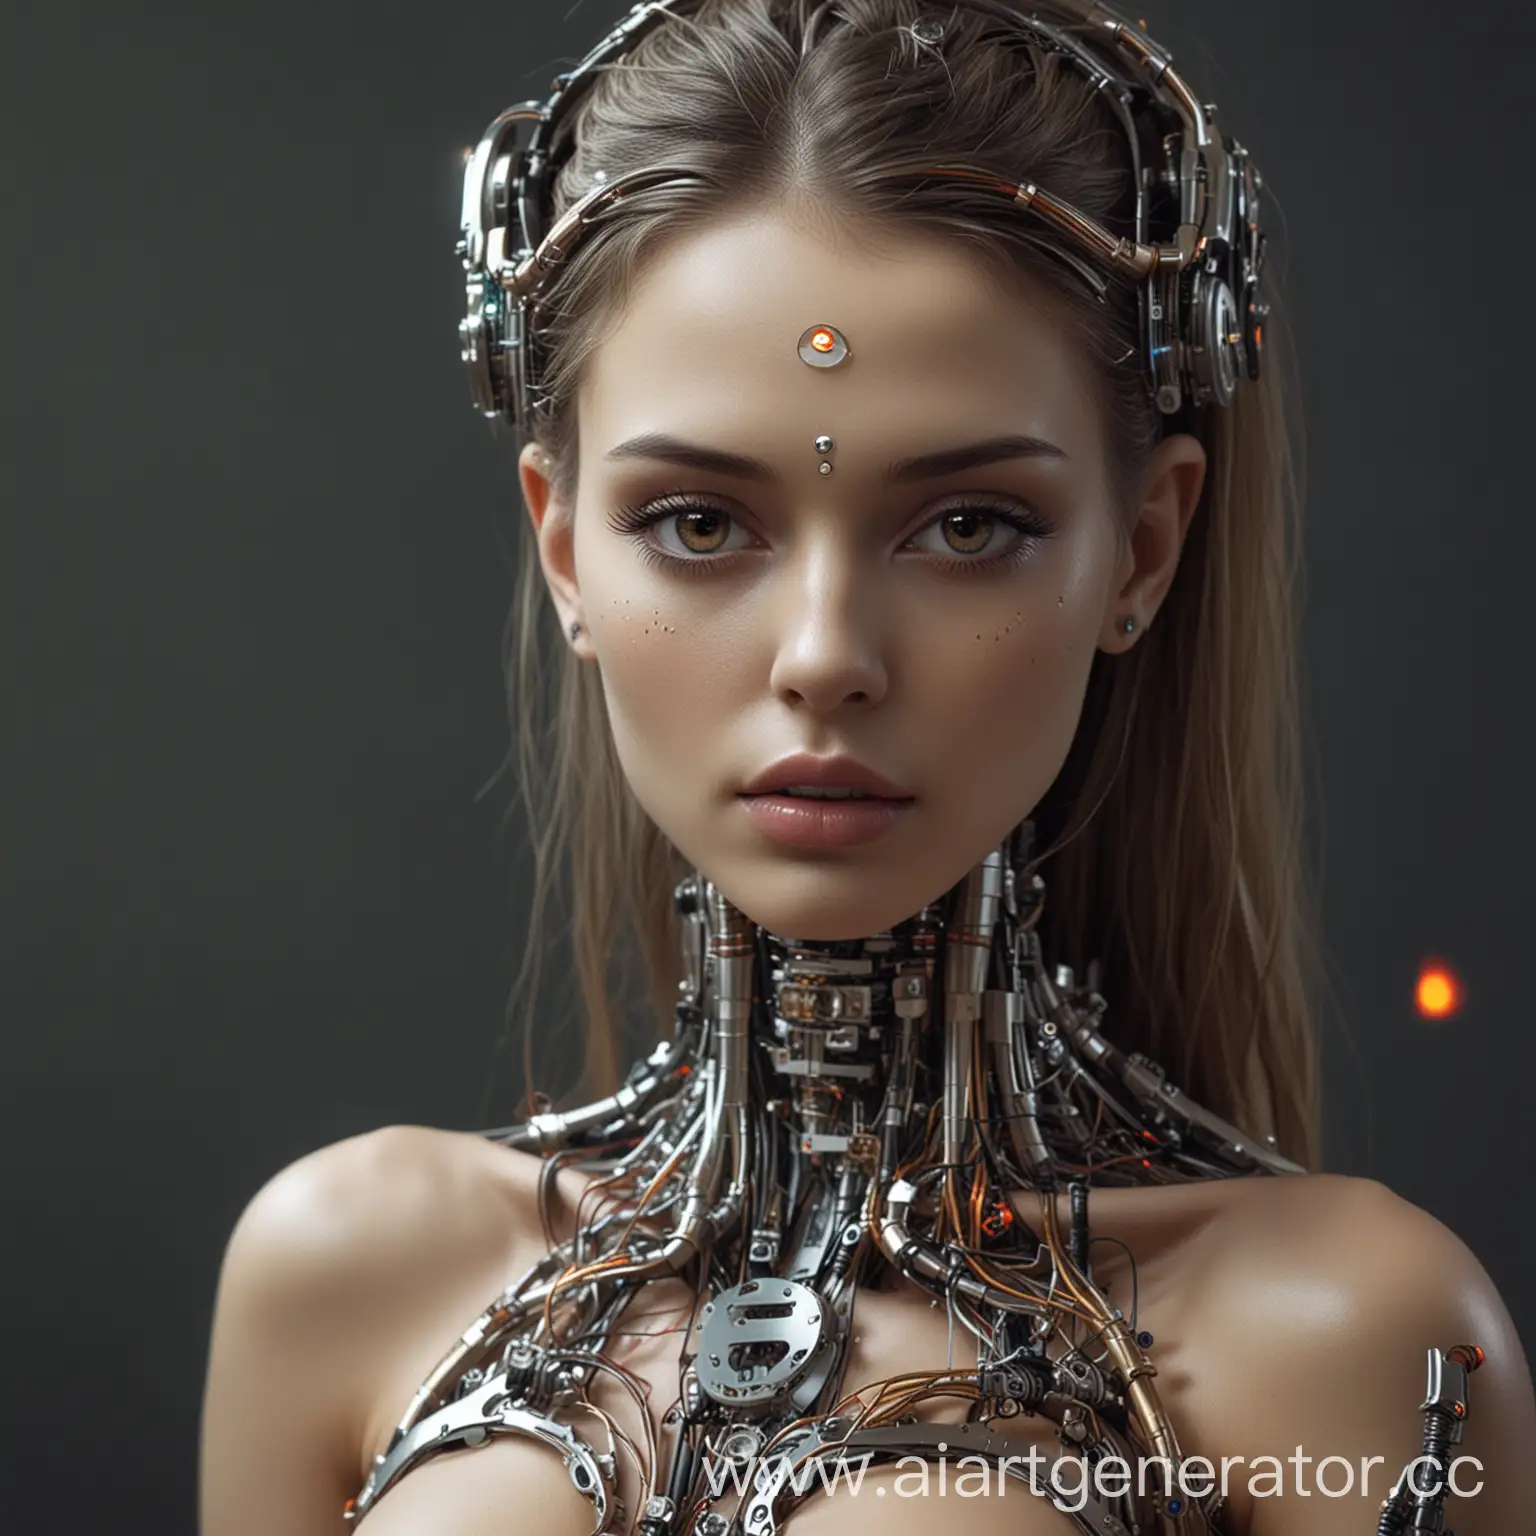 Intertwining-Sexual-Cyber-Artificial-Intelligence-and-Humans-in-Bitcoin-Symbiosis